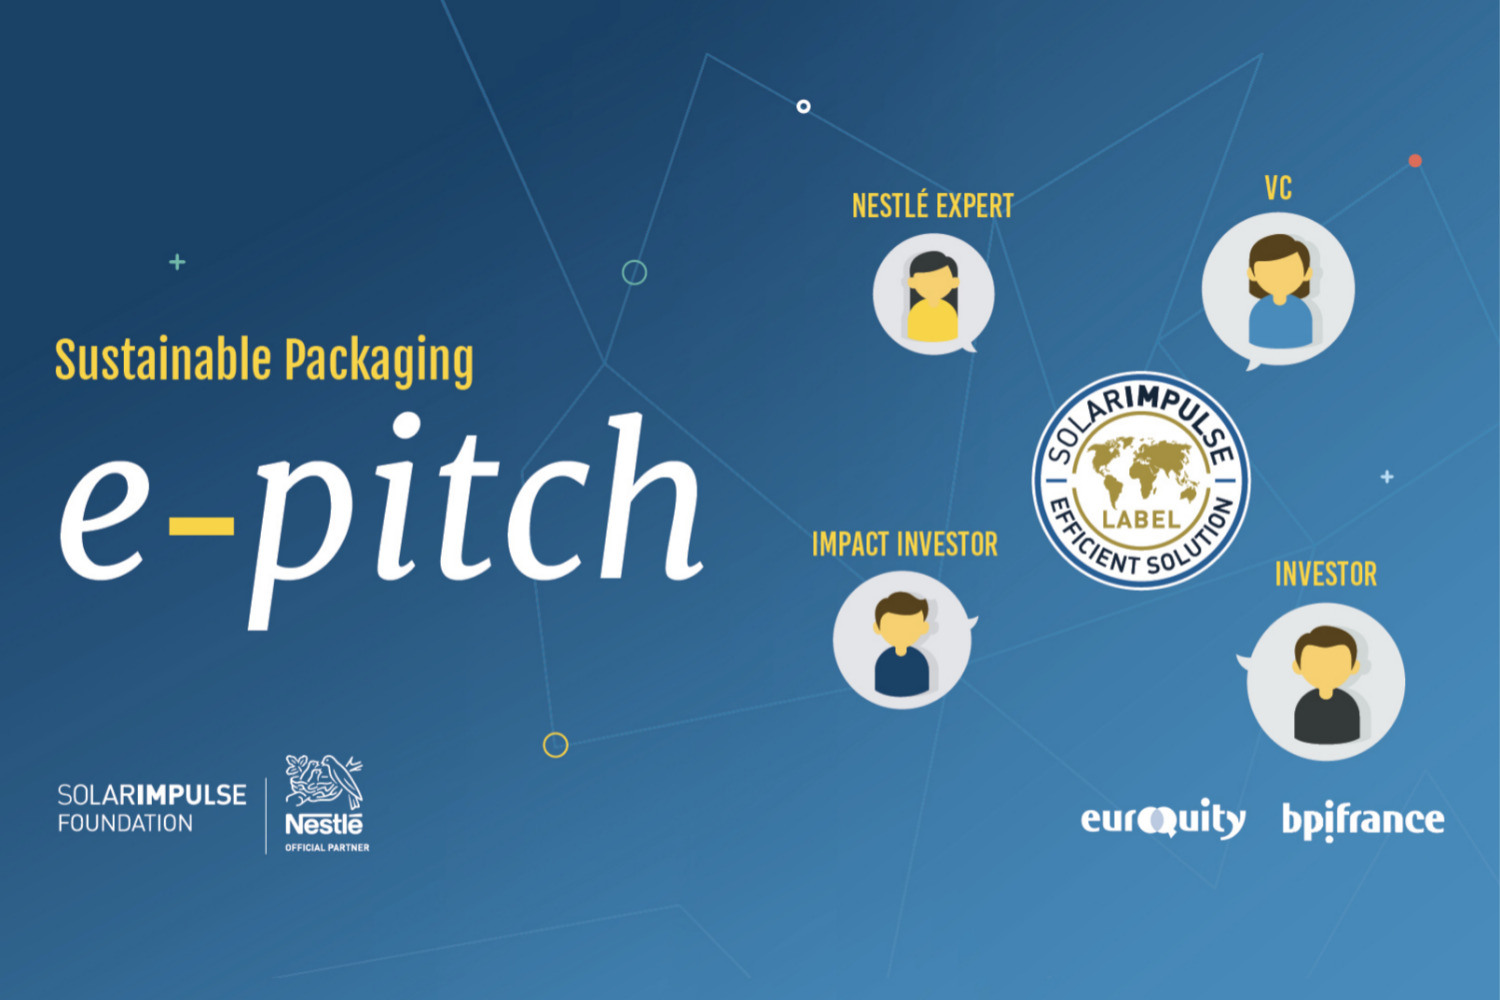 E-Pitch Solar Impulse Investment - "Verpackung und neue Materialien" - SIF x Nestlé